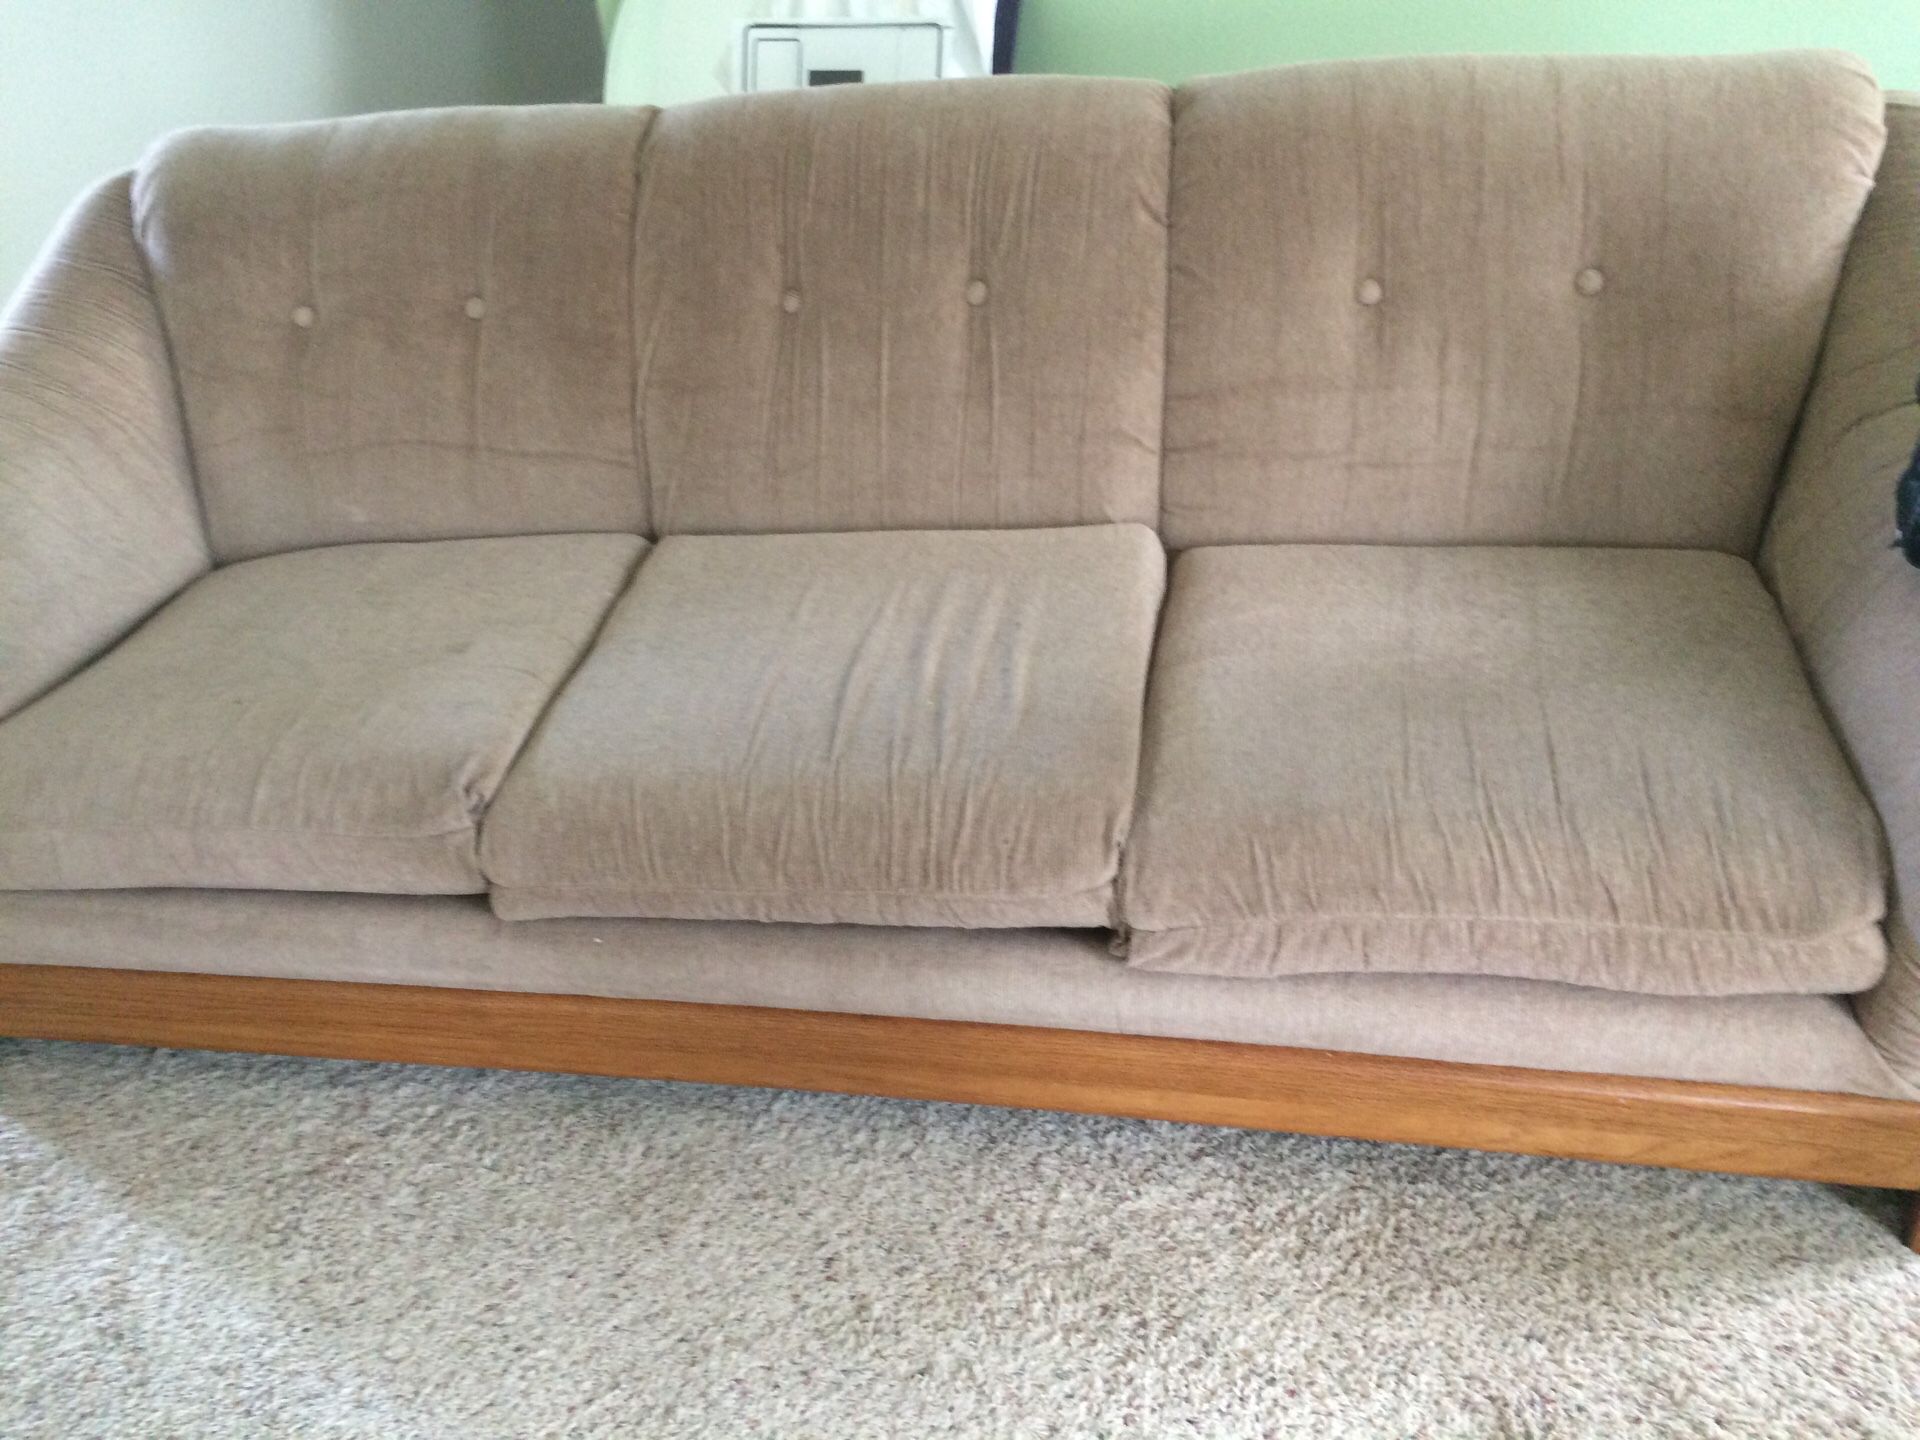 Free couch sofa for pickup